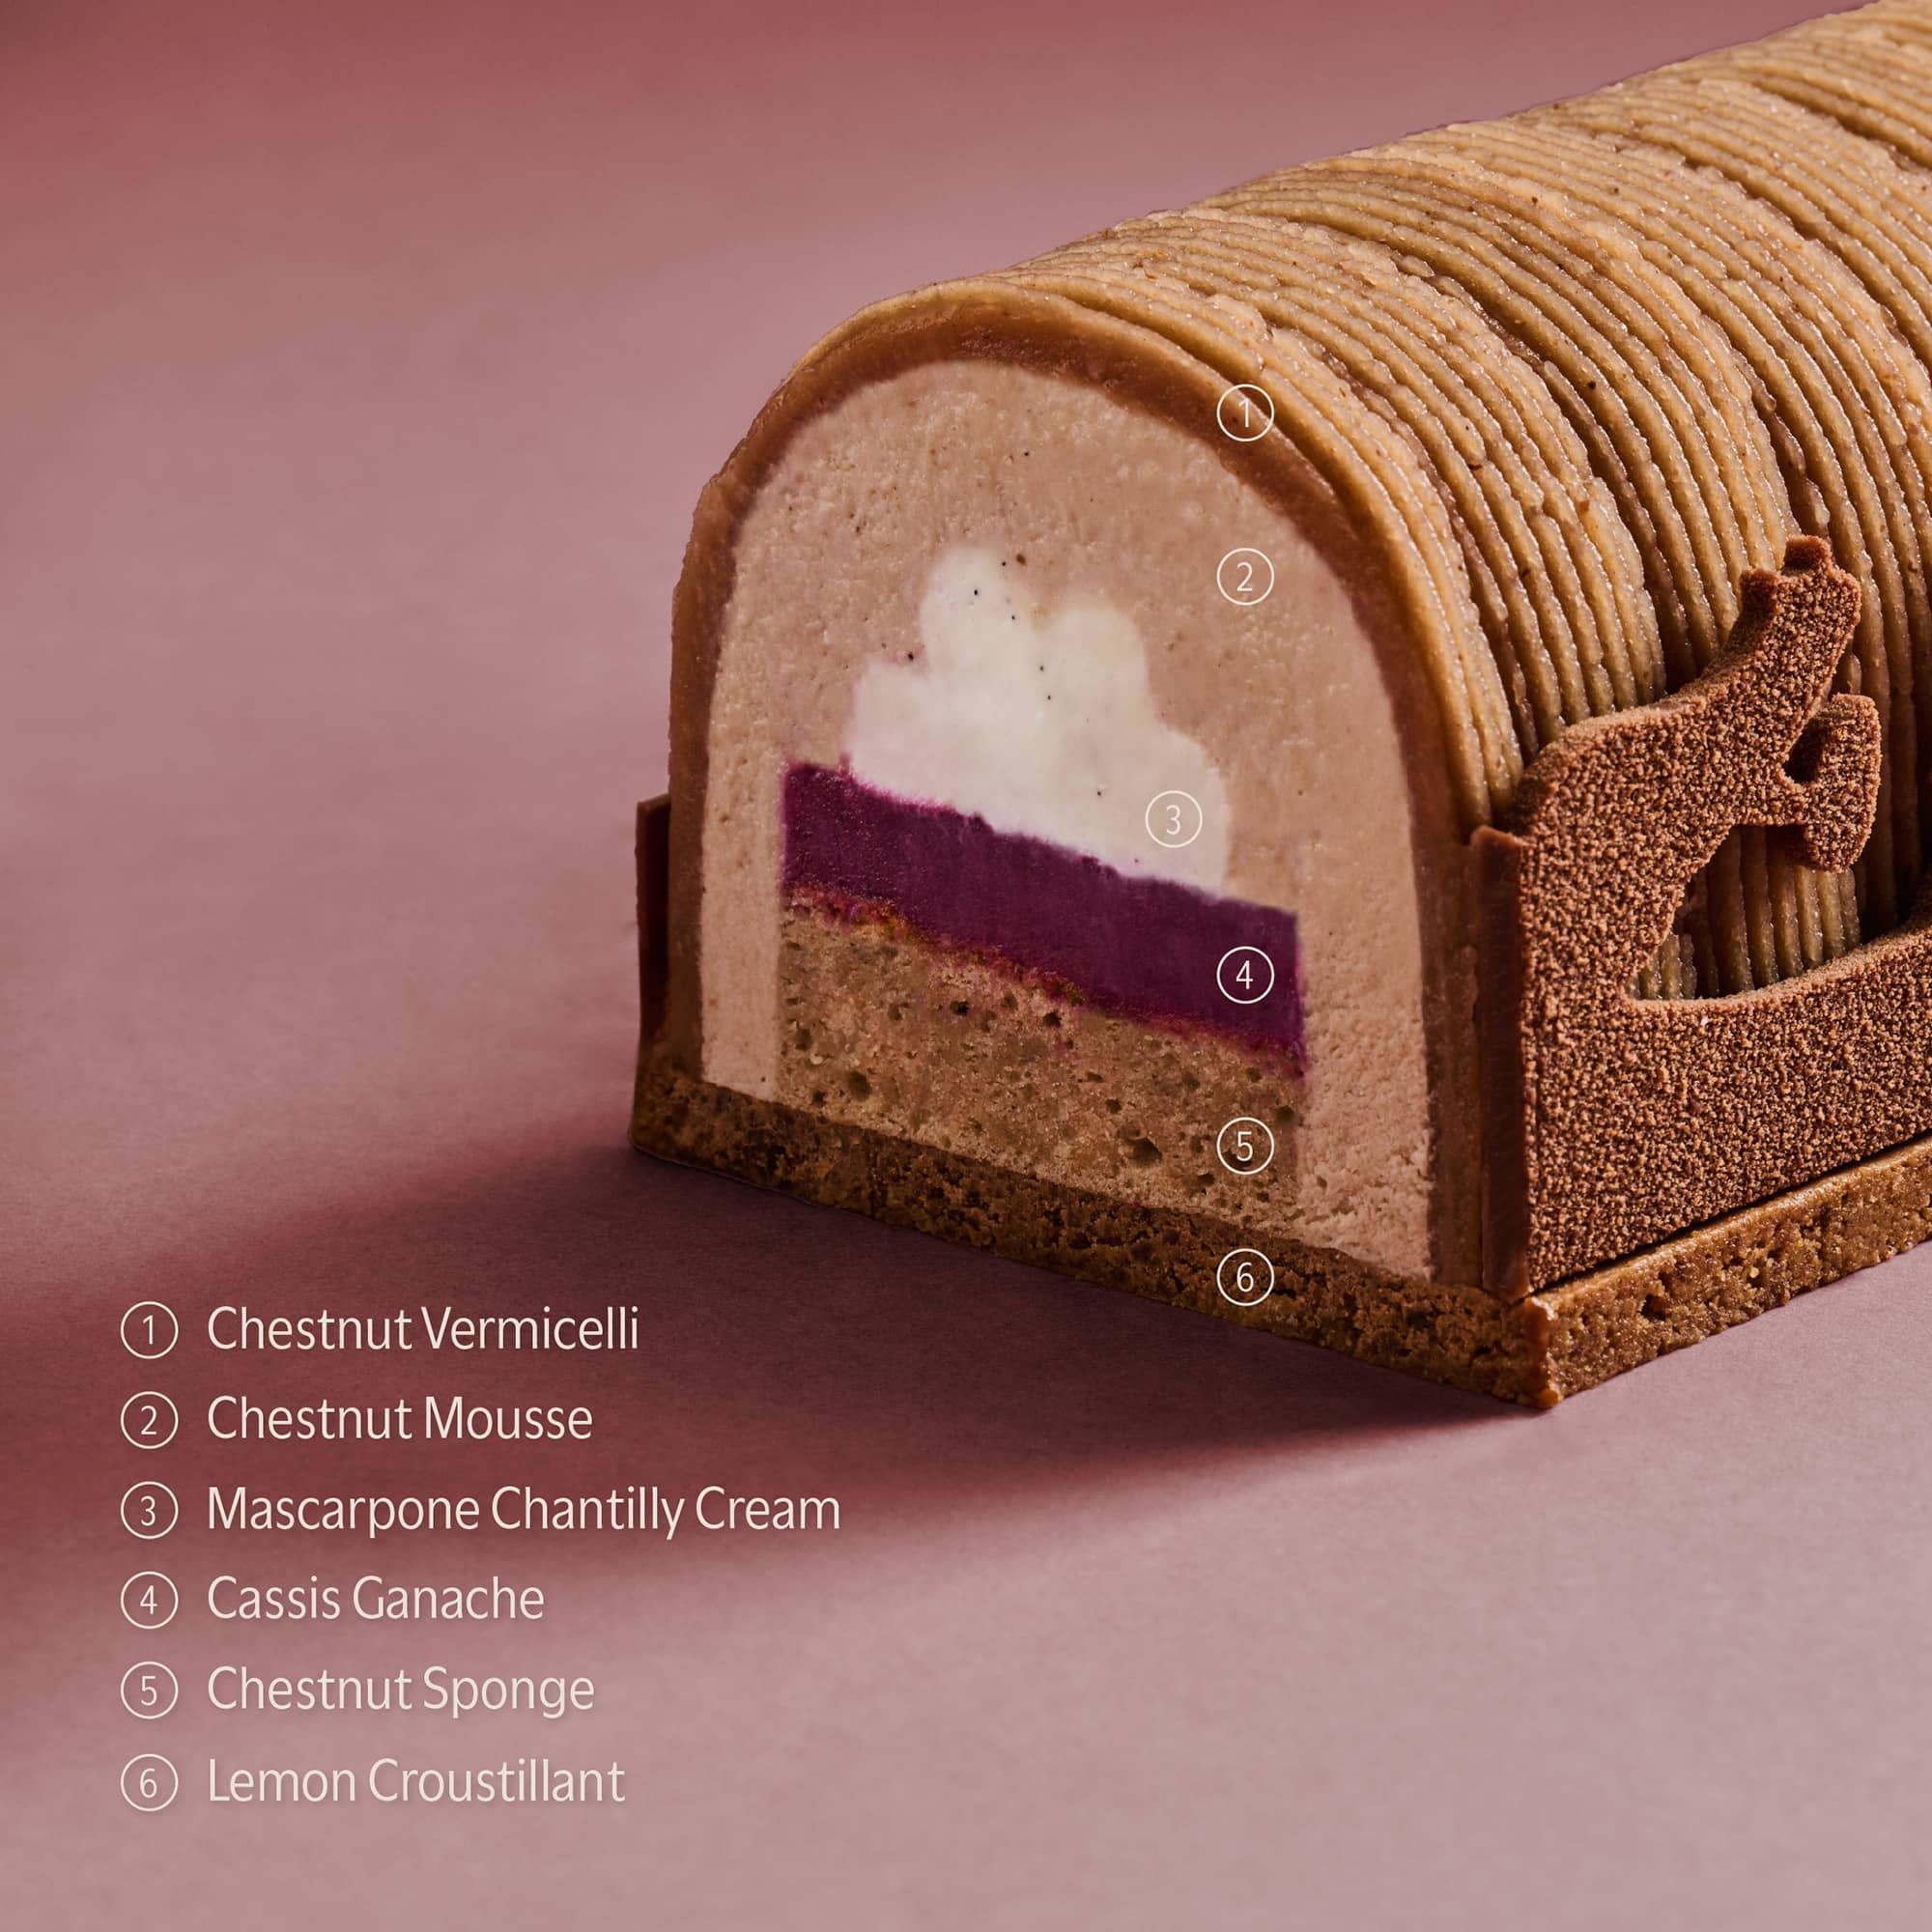 The inside chestnut vermicelli, mousse, mascarpone, blackcurrant, sponge and base layers of a Chestnut Mont Blanc cake, this year's 2023 Christmas log cake